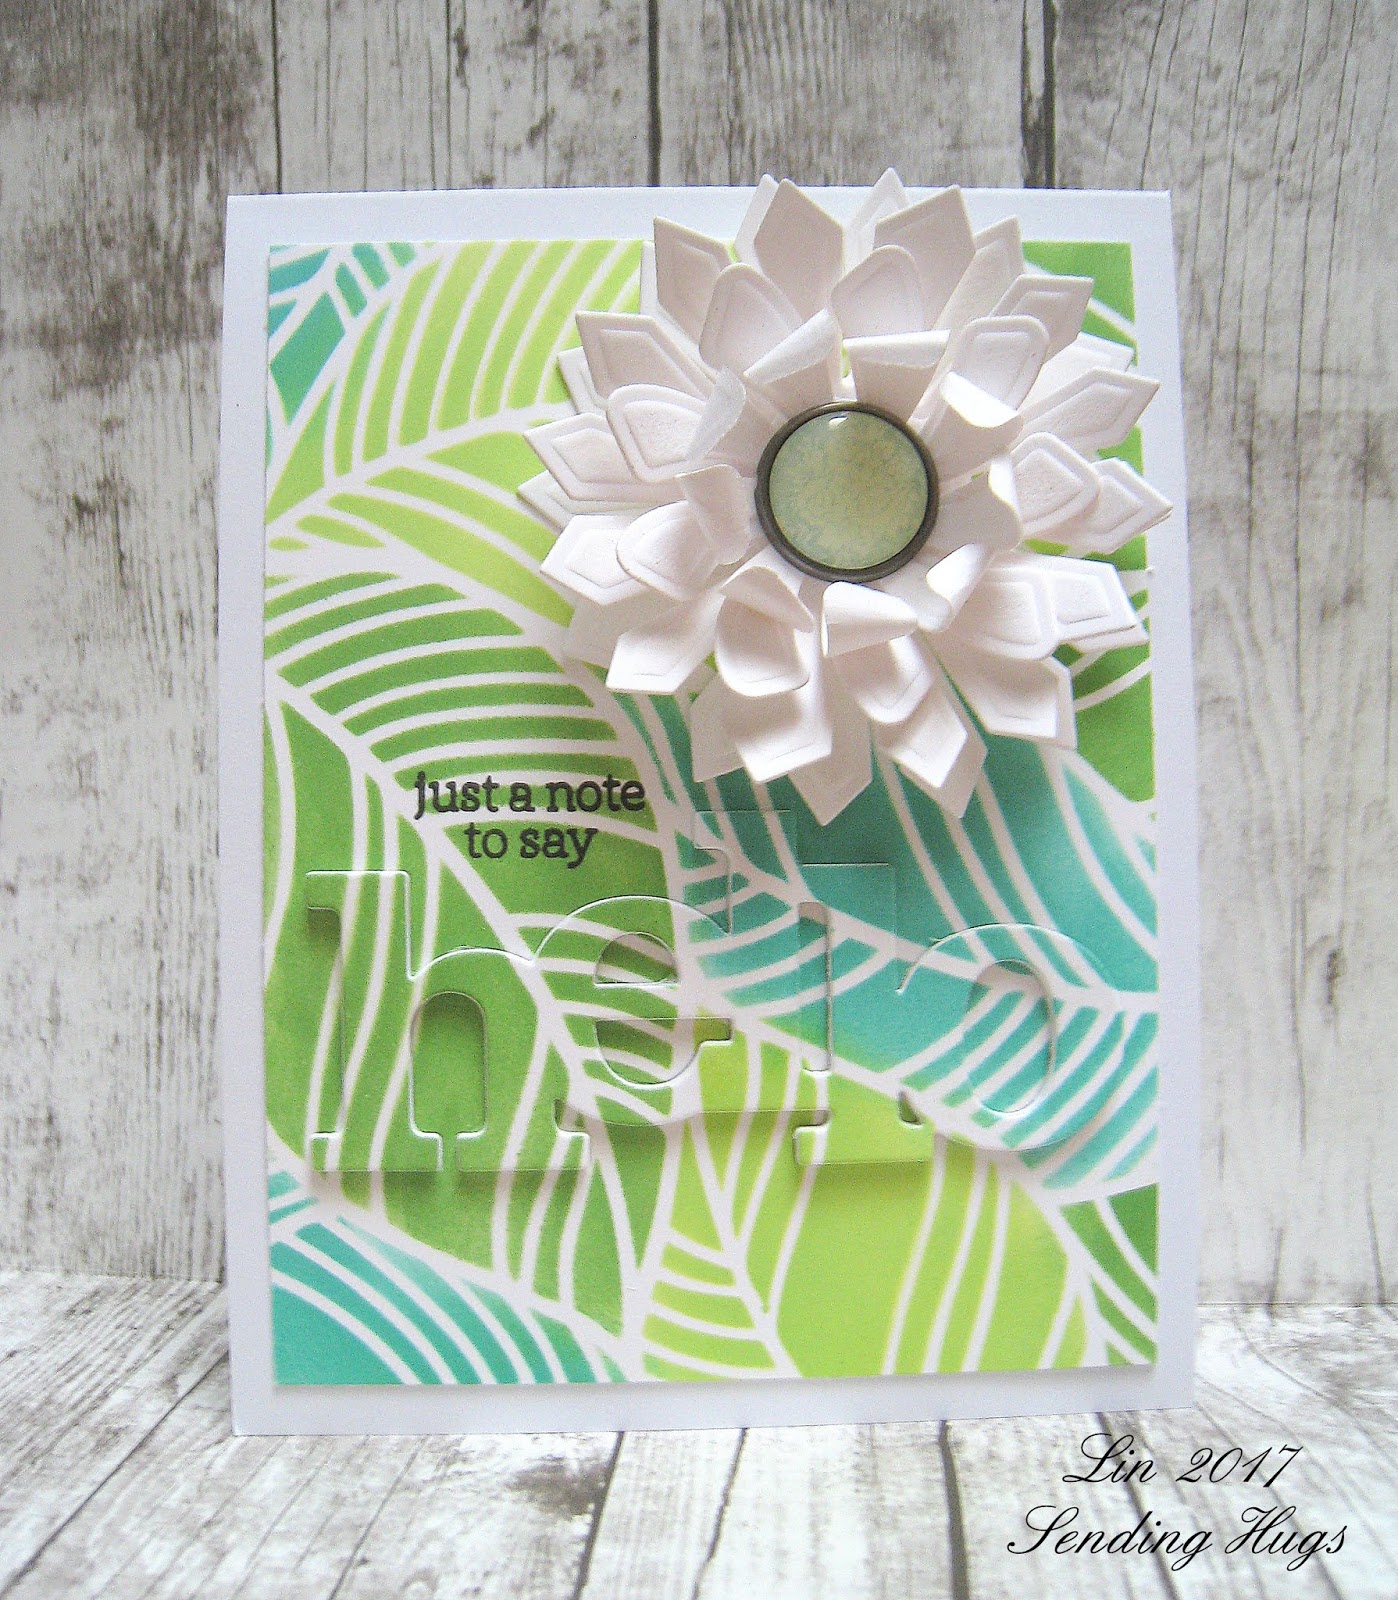 Cutaway card with hello and flowers